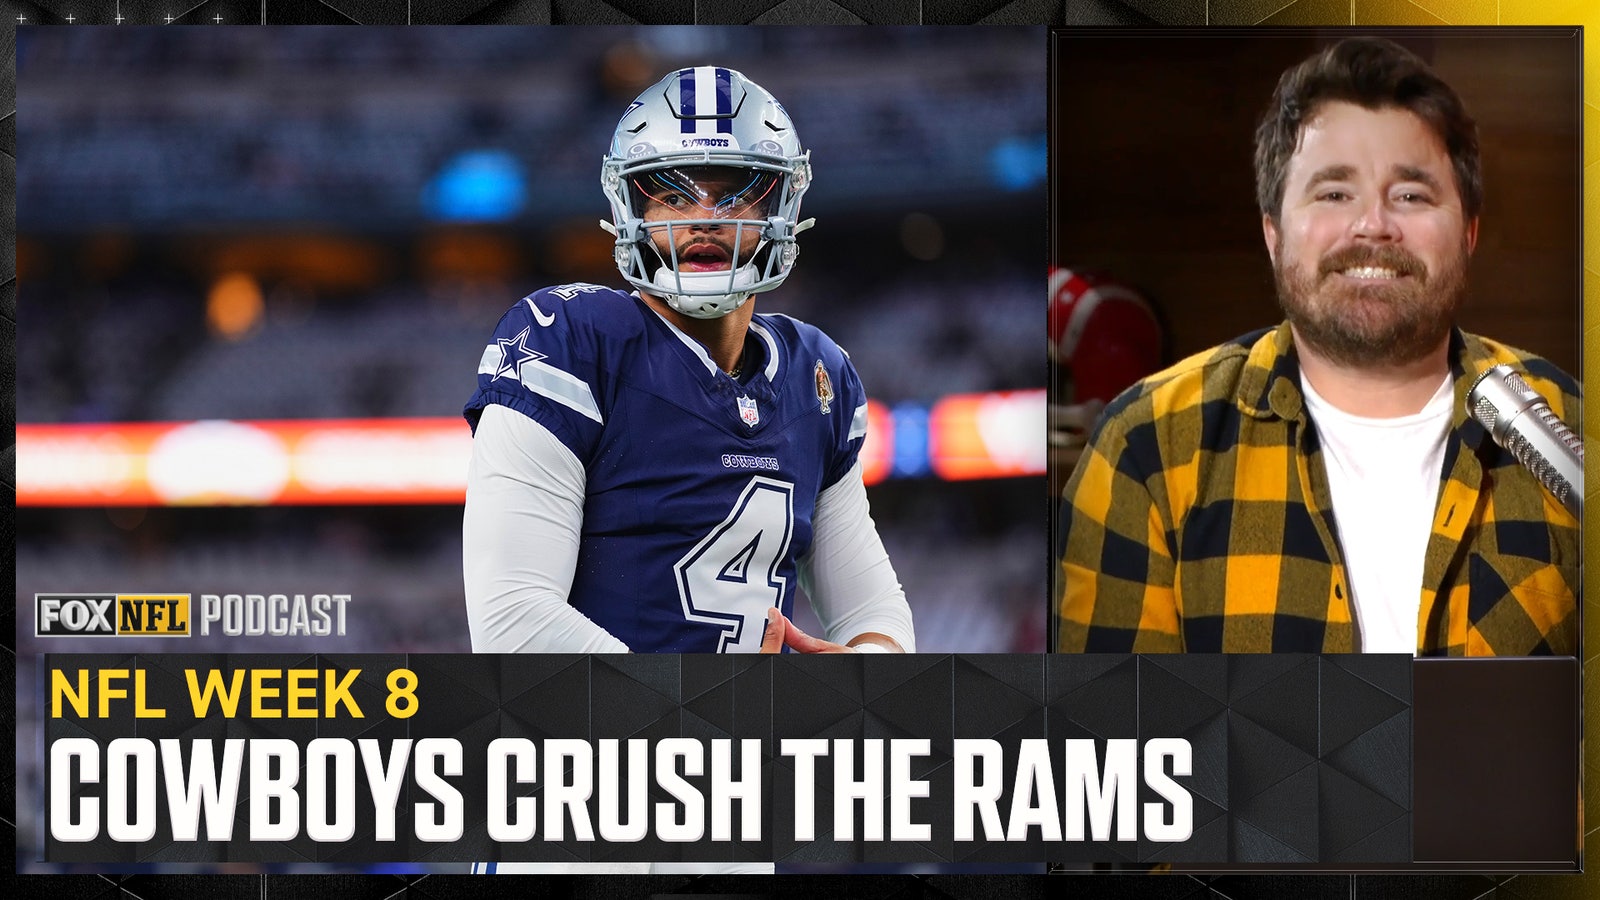 Dave Helman reacts after Cowboys CRUSH Rams